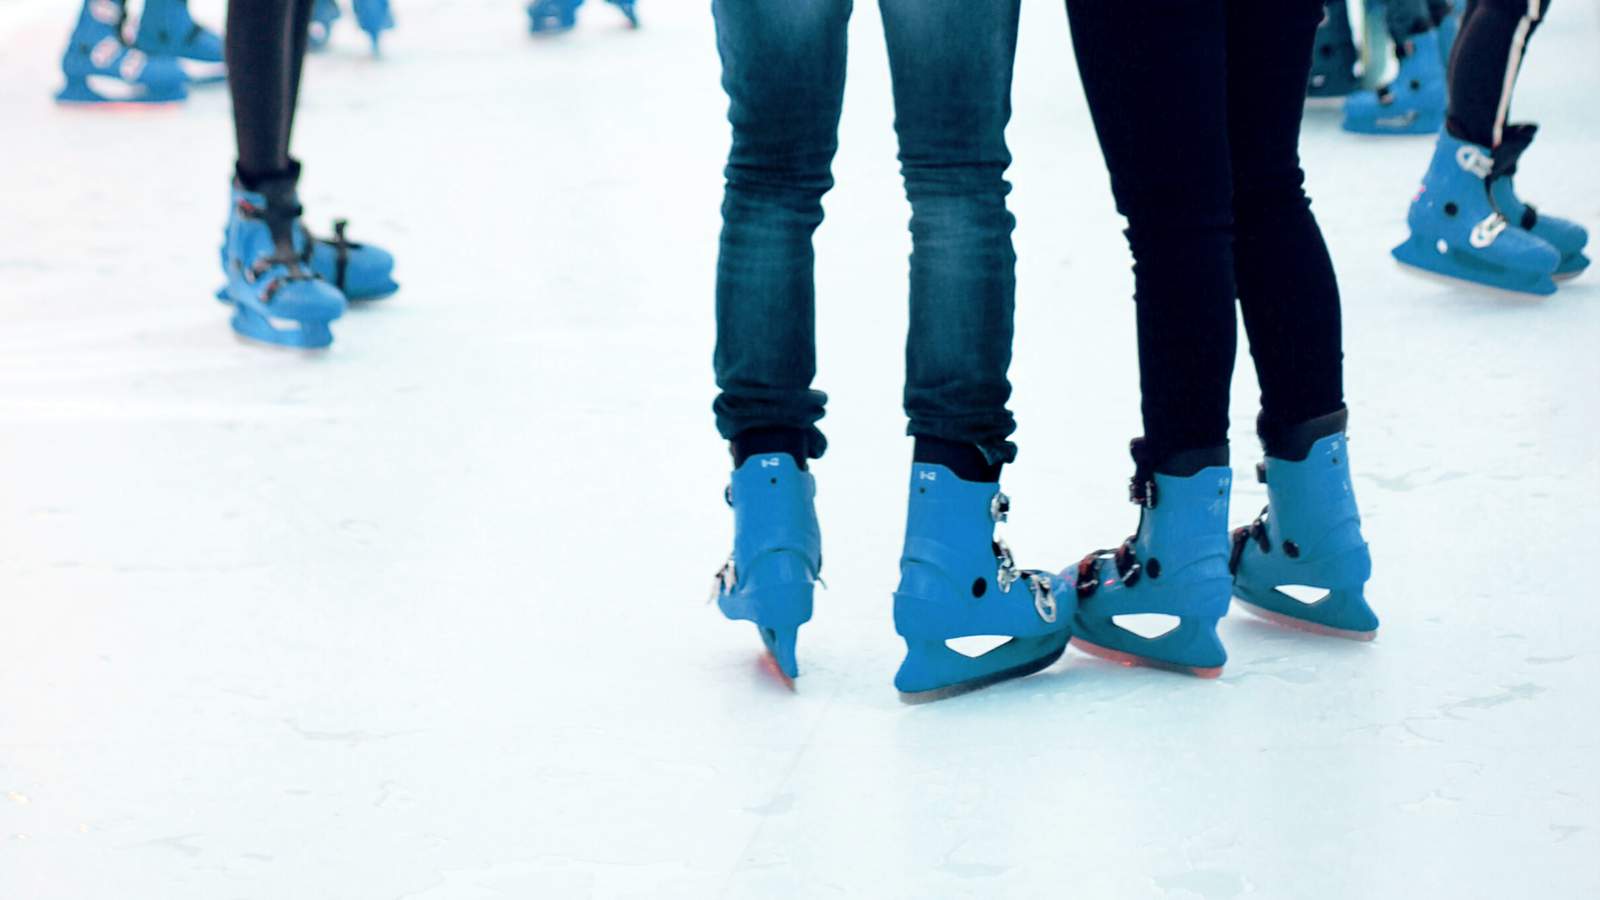 Campus Martius ice skating rink closes amid new COVID restrictions in Michigan